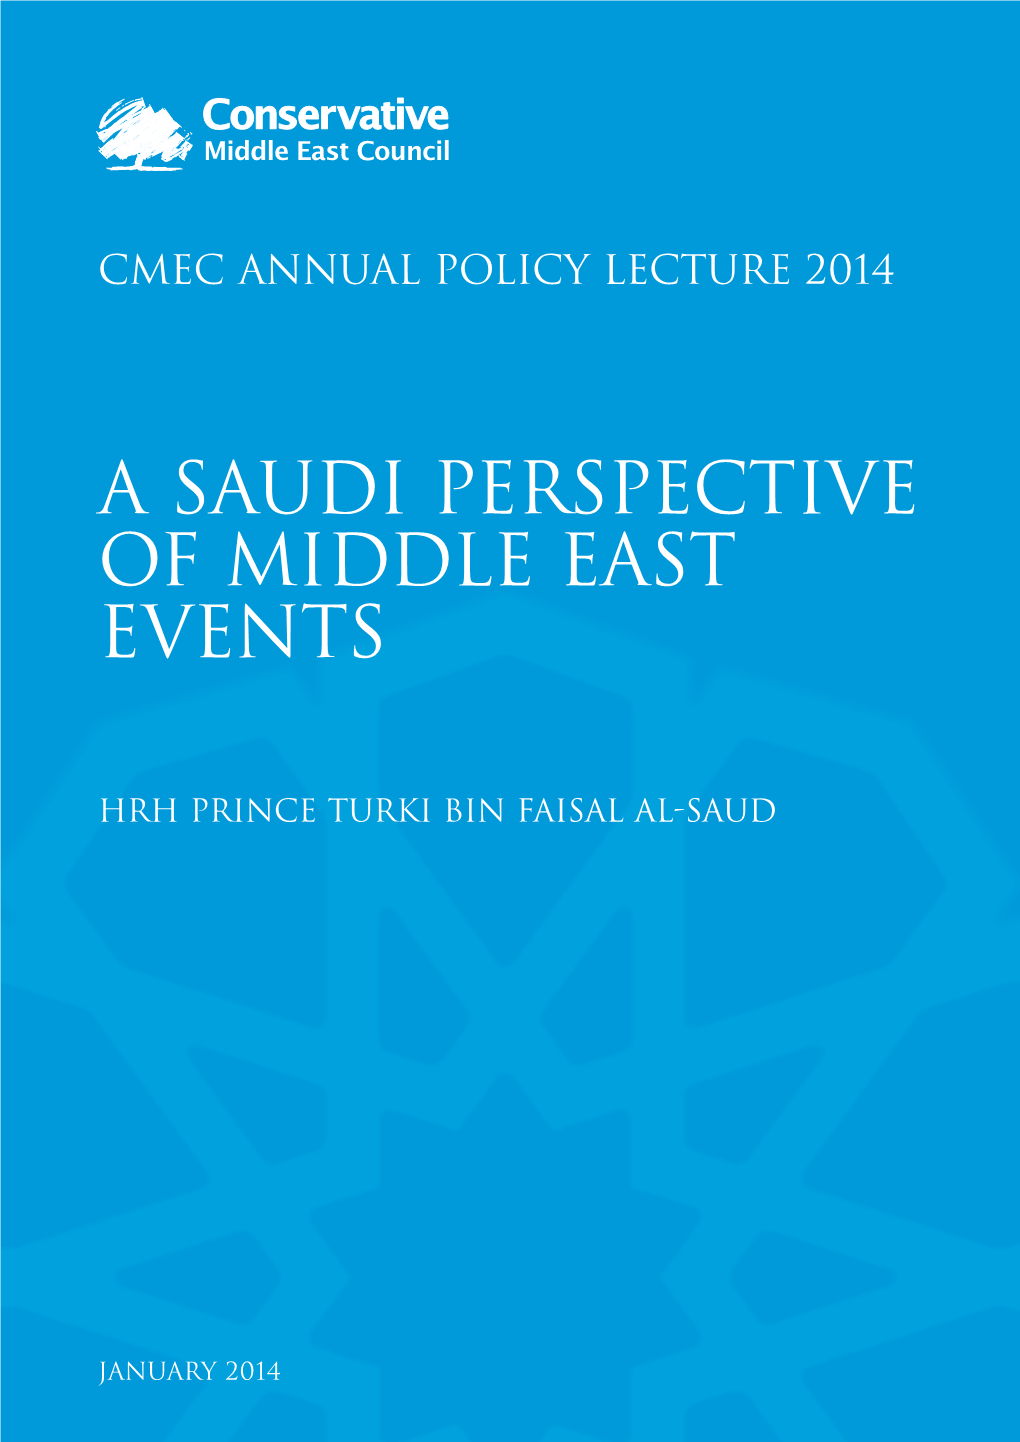 A Saudi Perspective of Middle East Events